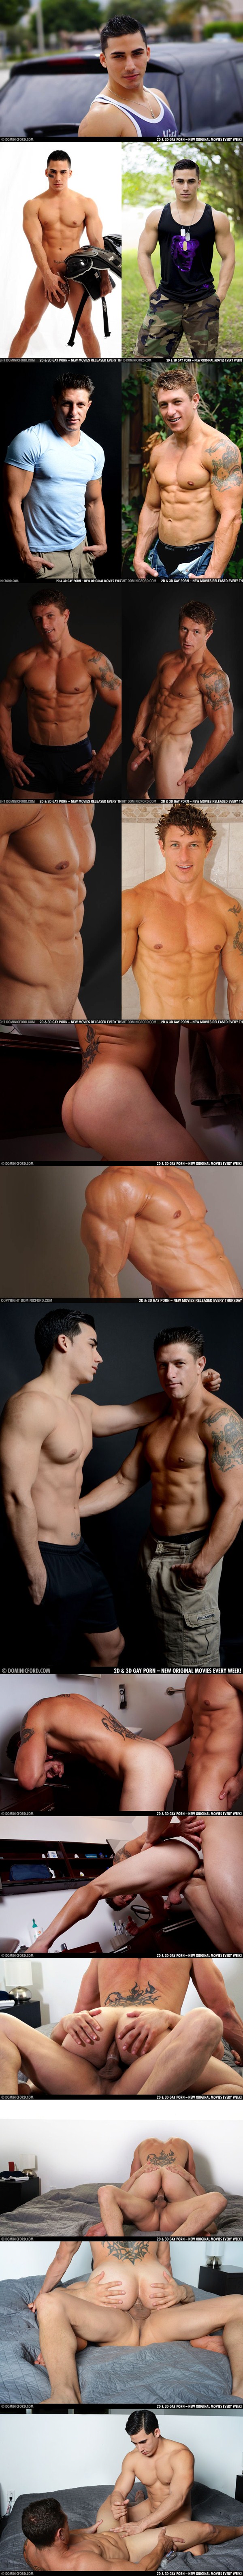 Handsome big-dicked Topher DiMaggio fucks hot muscular Bryce Evans in his bubble butt at Dominicford 01